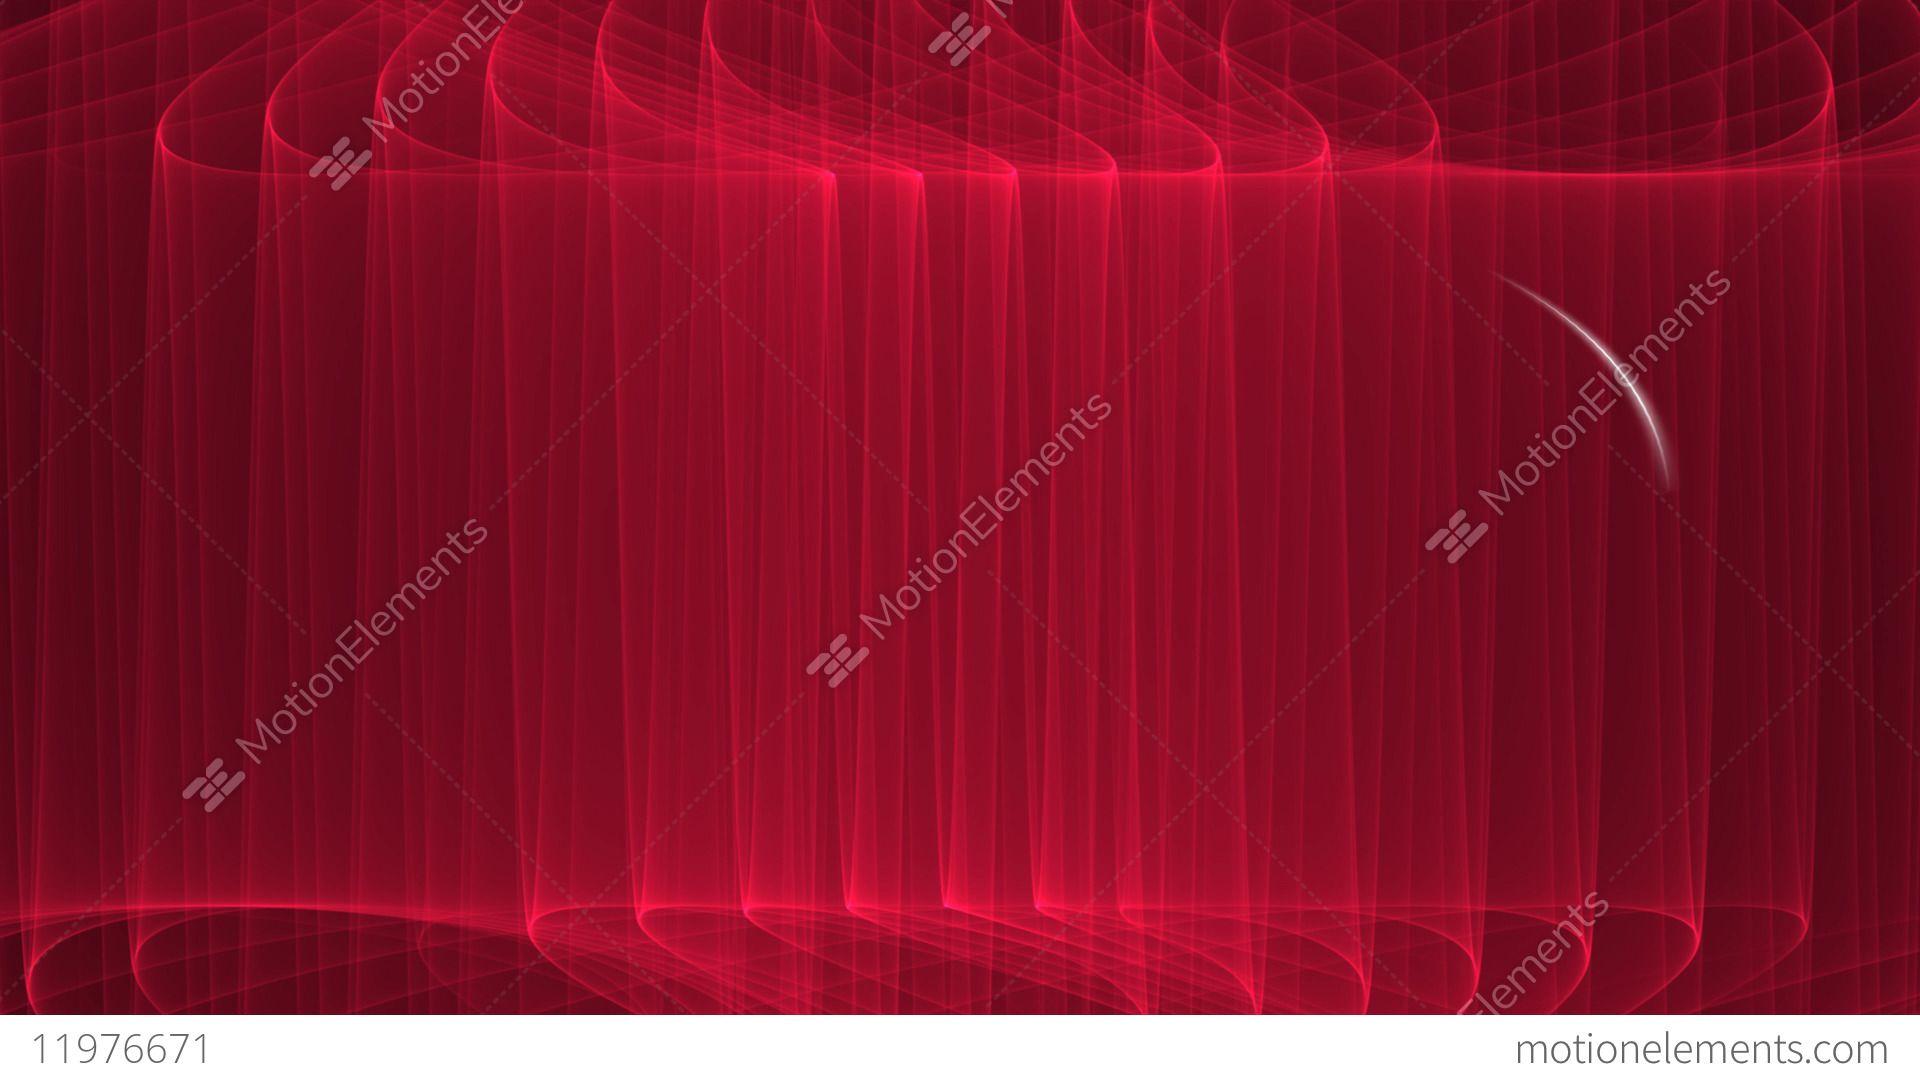 White with Red Curve Logo - Dark Red Curves Background With Little White Cosmic Object Comet ...